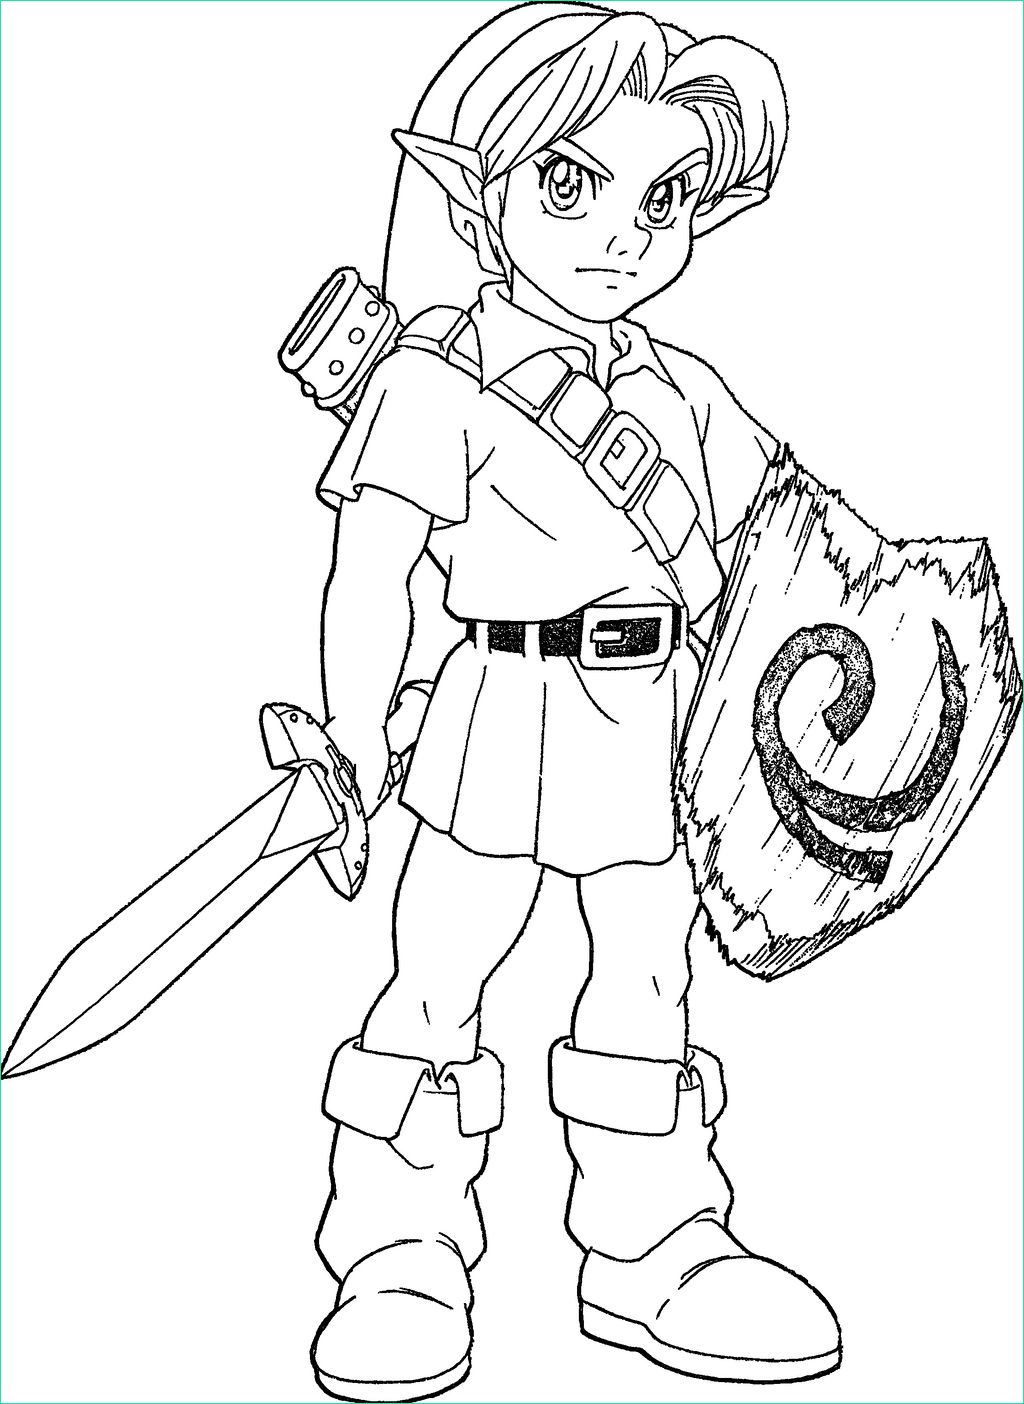 Coloriage Link Breath Of the Wild Beau Photographie Young Link Ocarina Of Time Lineart by Skylight1989 On